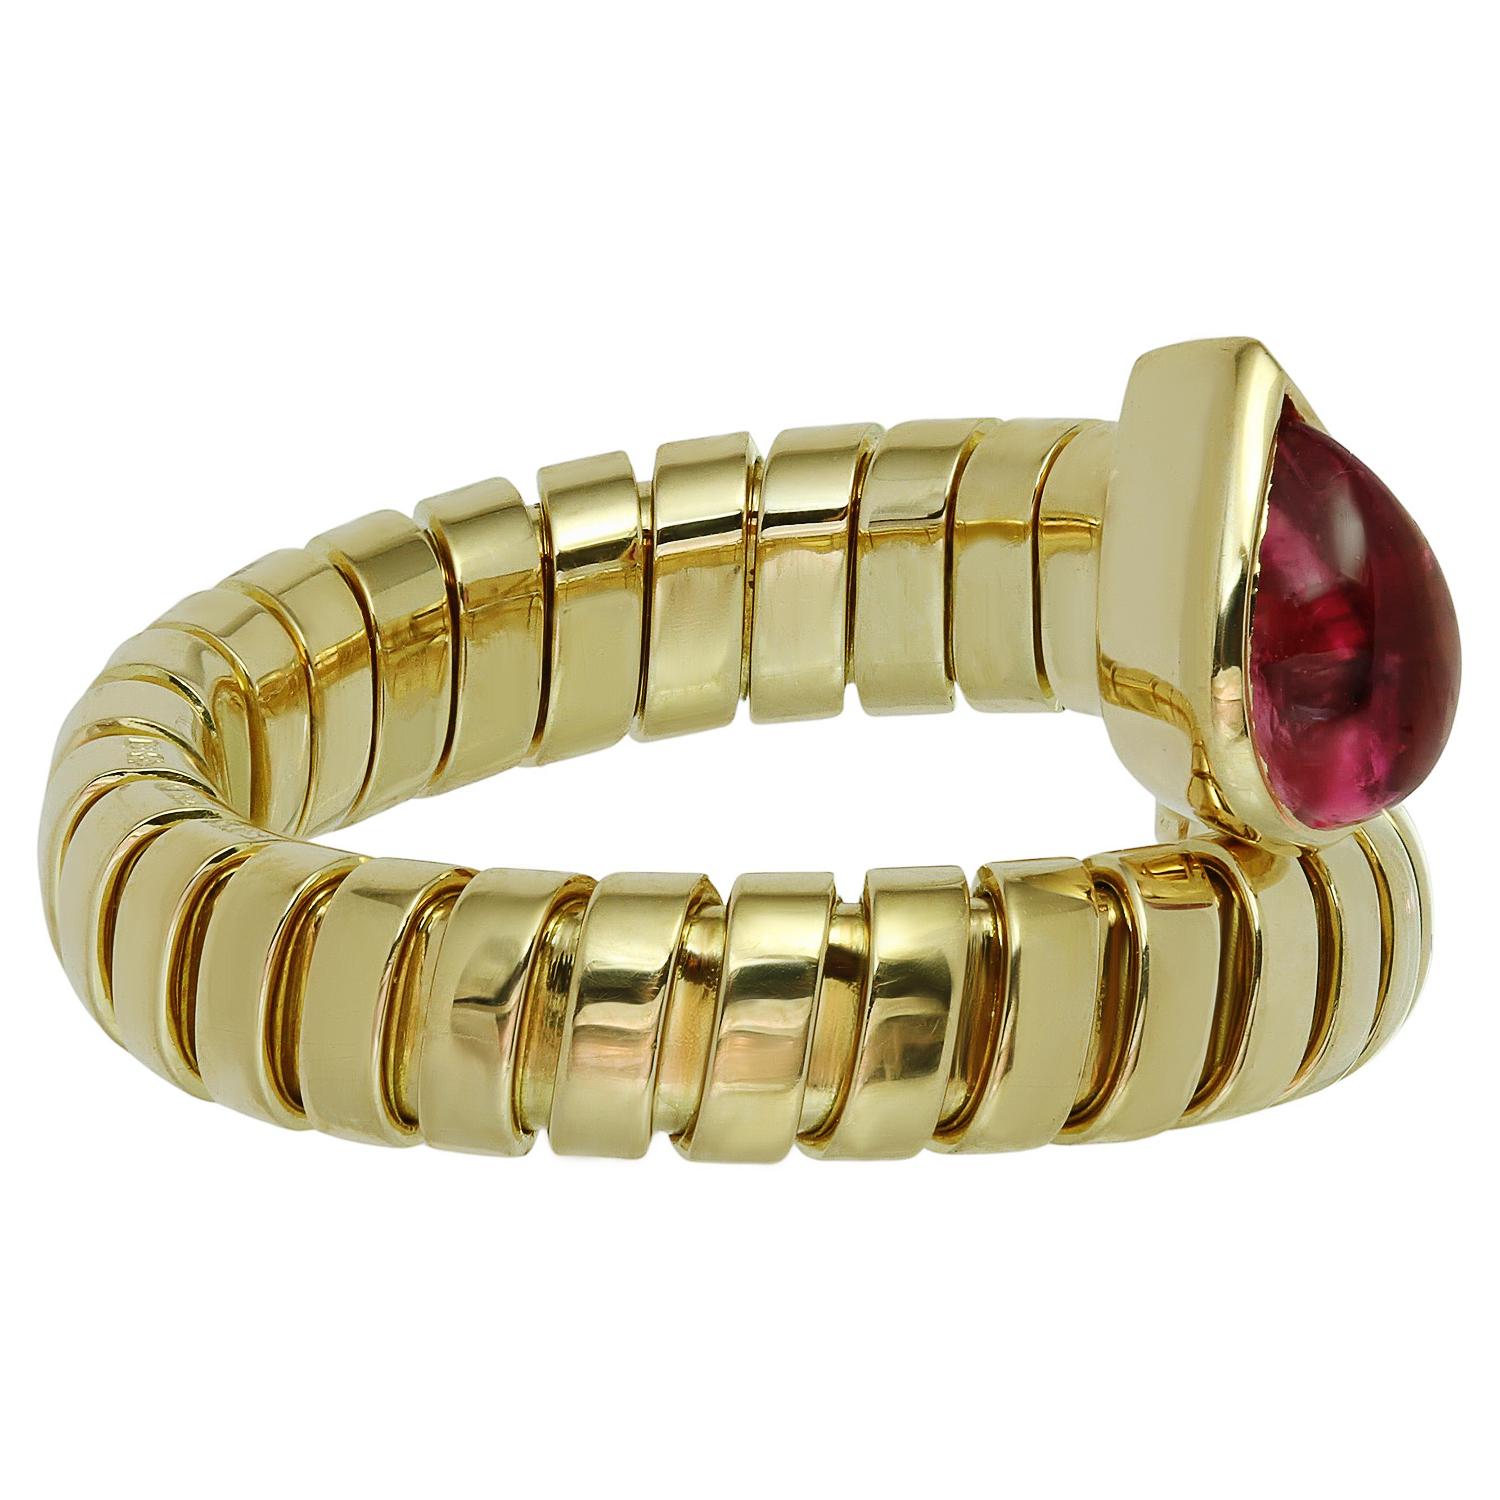 Bvlgari Tubogas Pink Tourmaline 18k Yellow Gold Ring In Excellent Condition For Sale In New York, NY